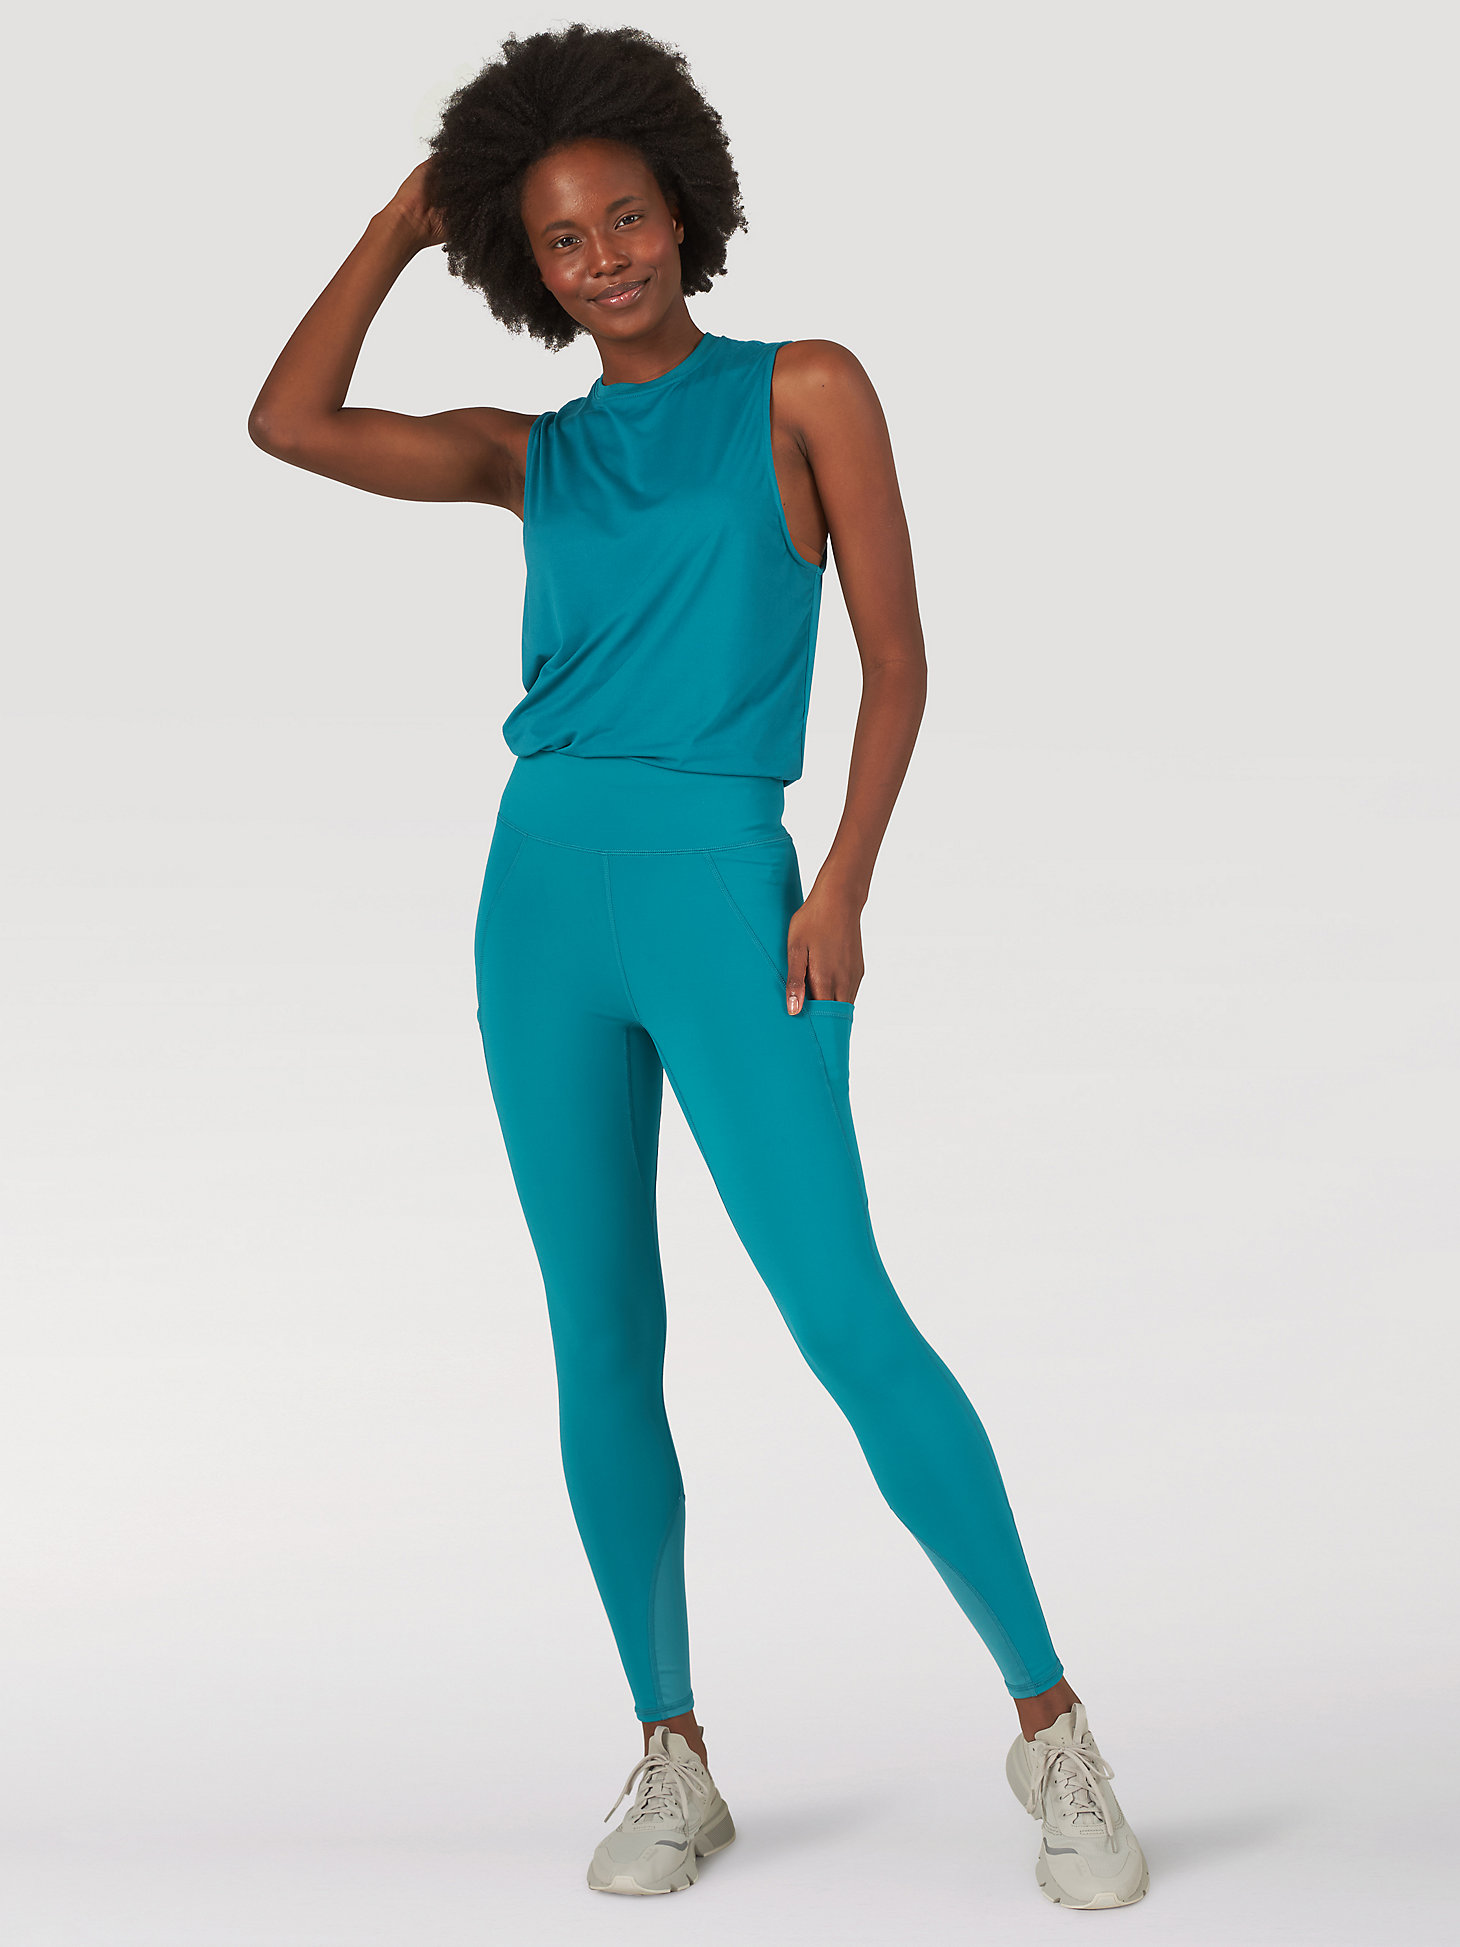 ATG By Wrangler™ Women's Compression Leggings in Exotic Plume alternative view 5